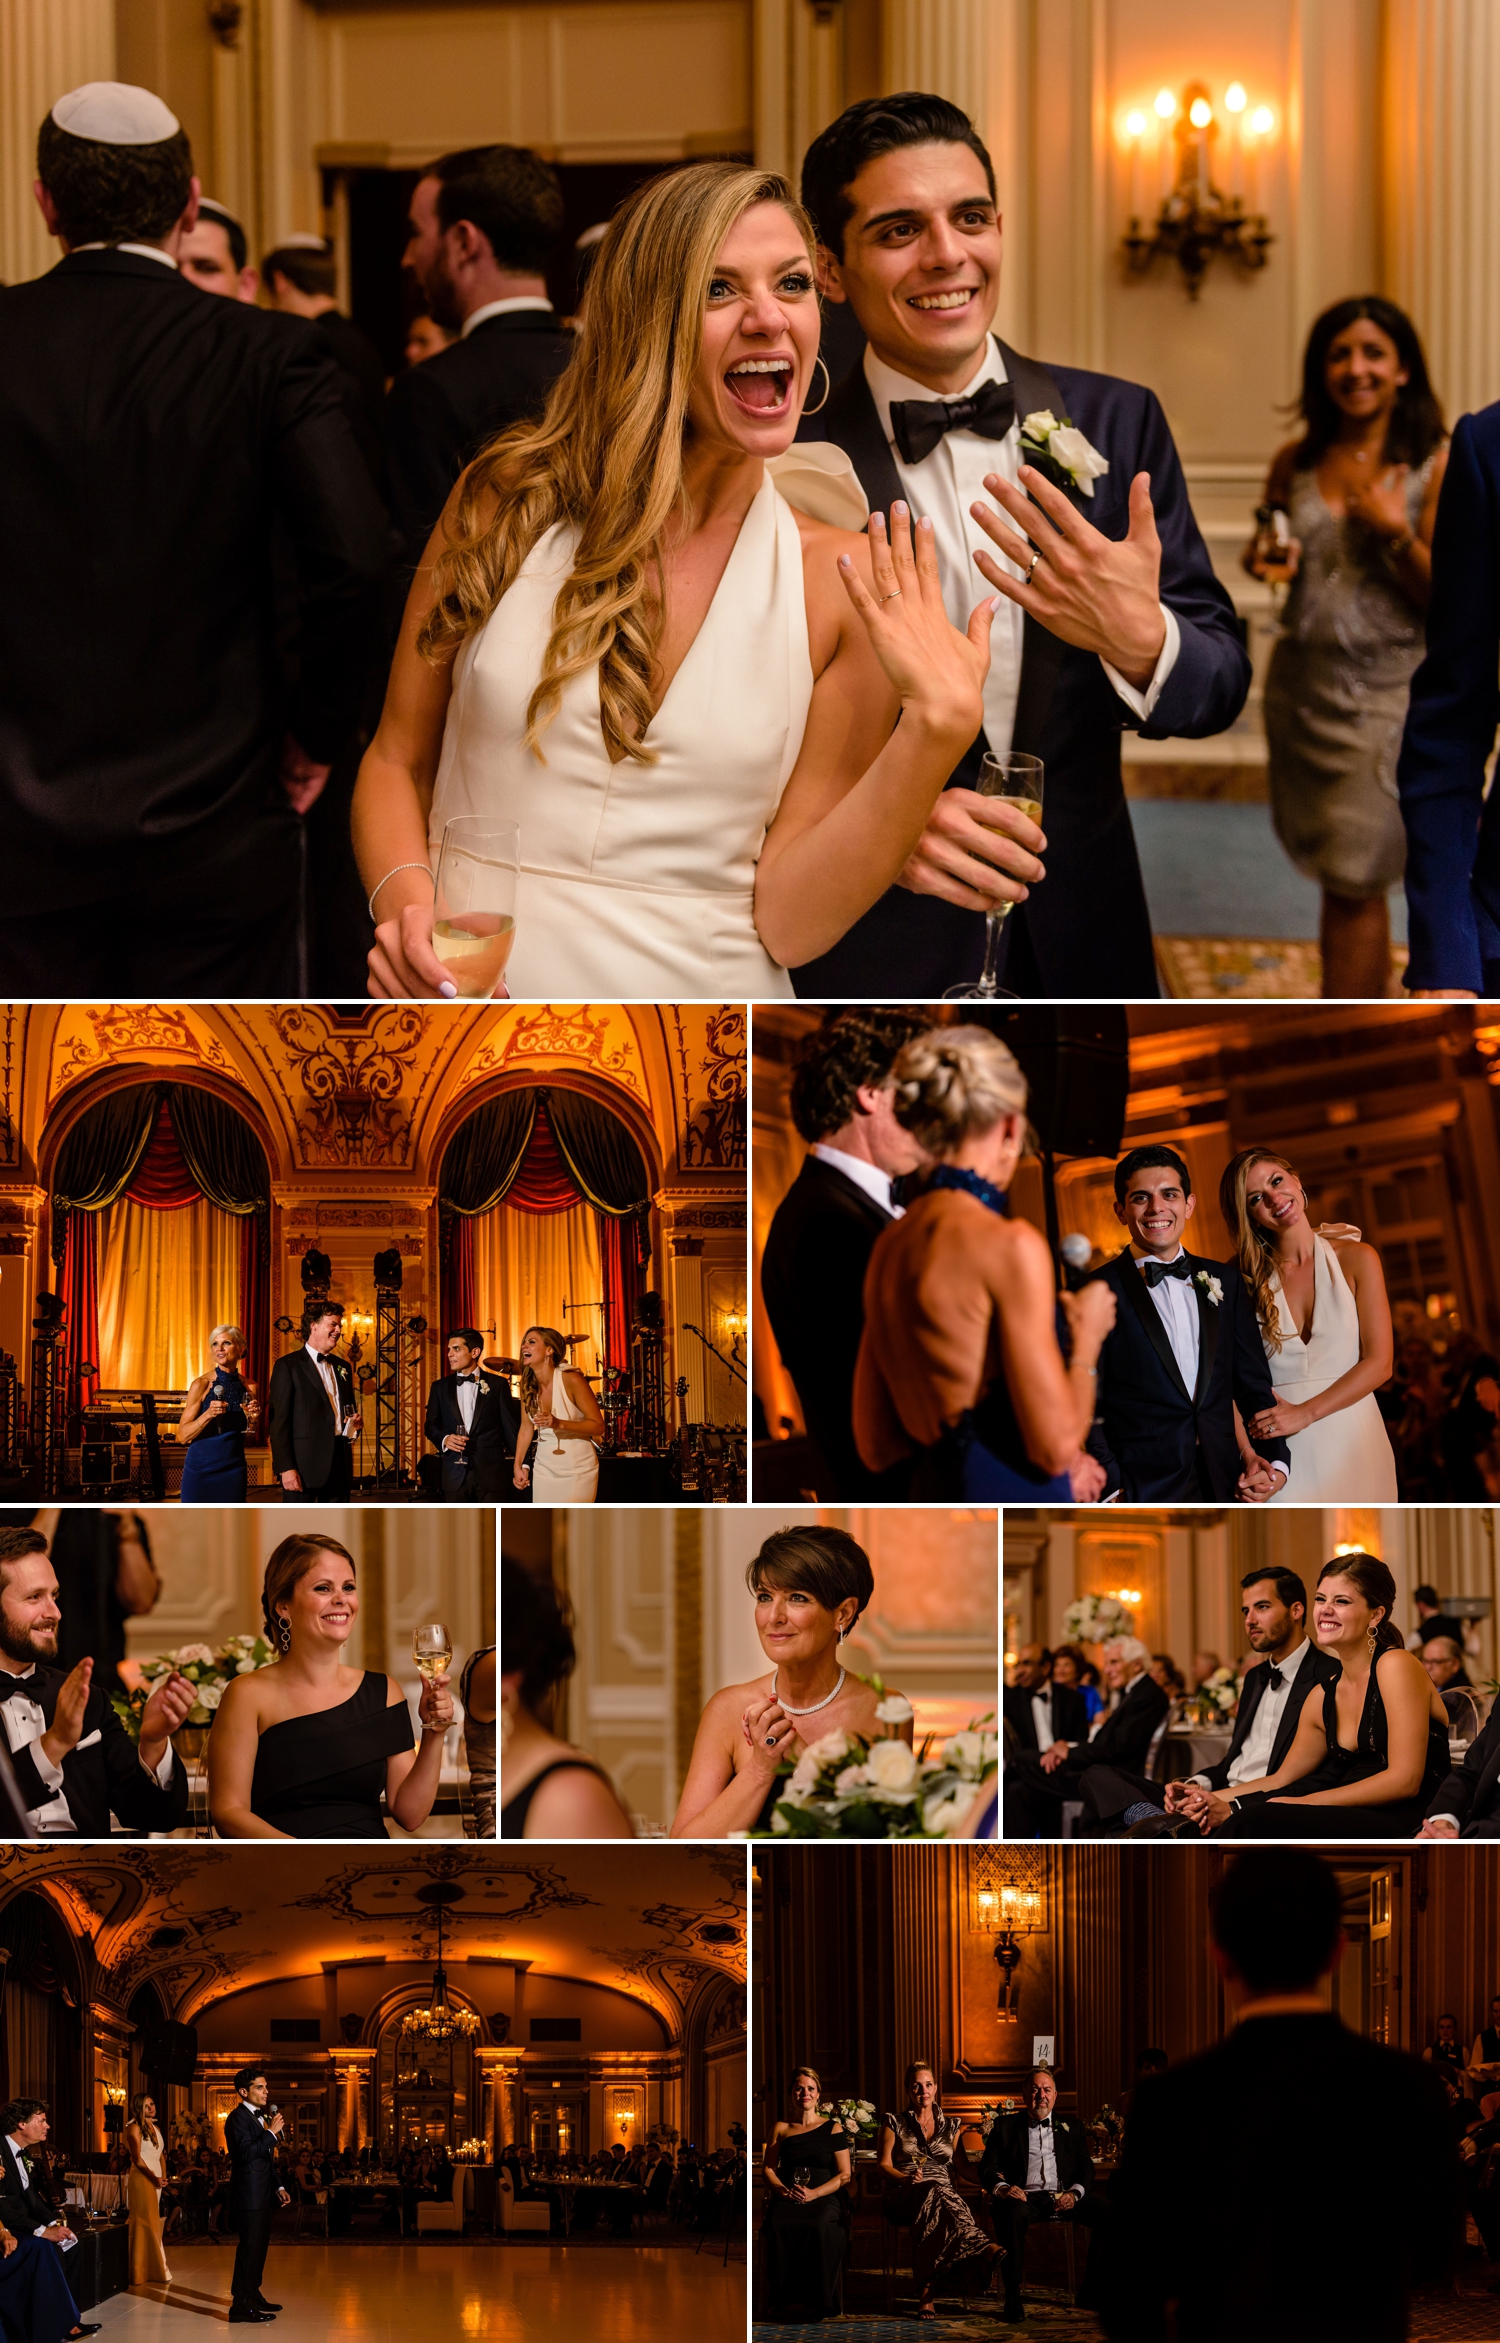 photos of candid moments during a jewish wedding reception at the chateau laurier wedding in ottawa ontario